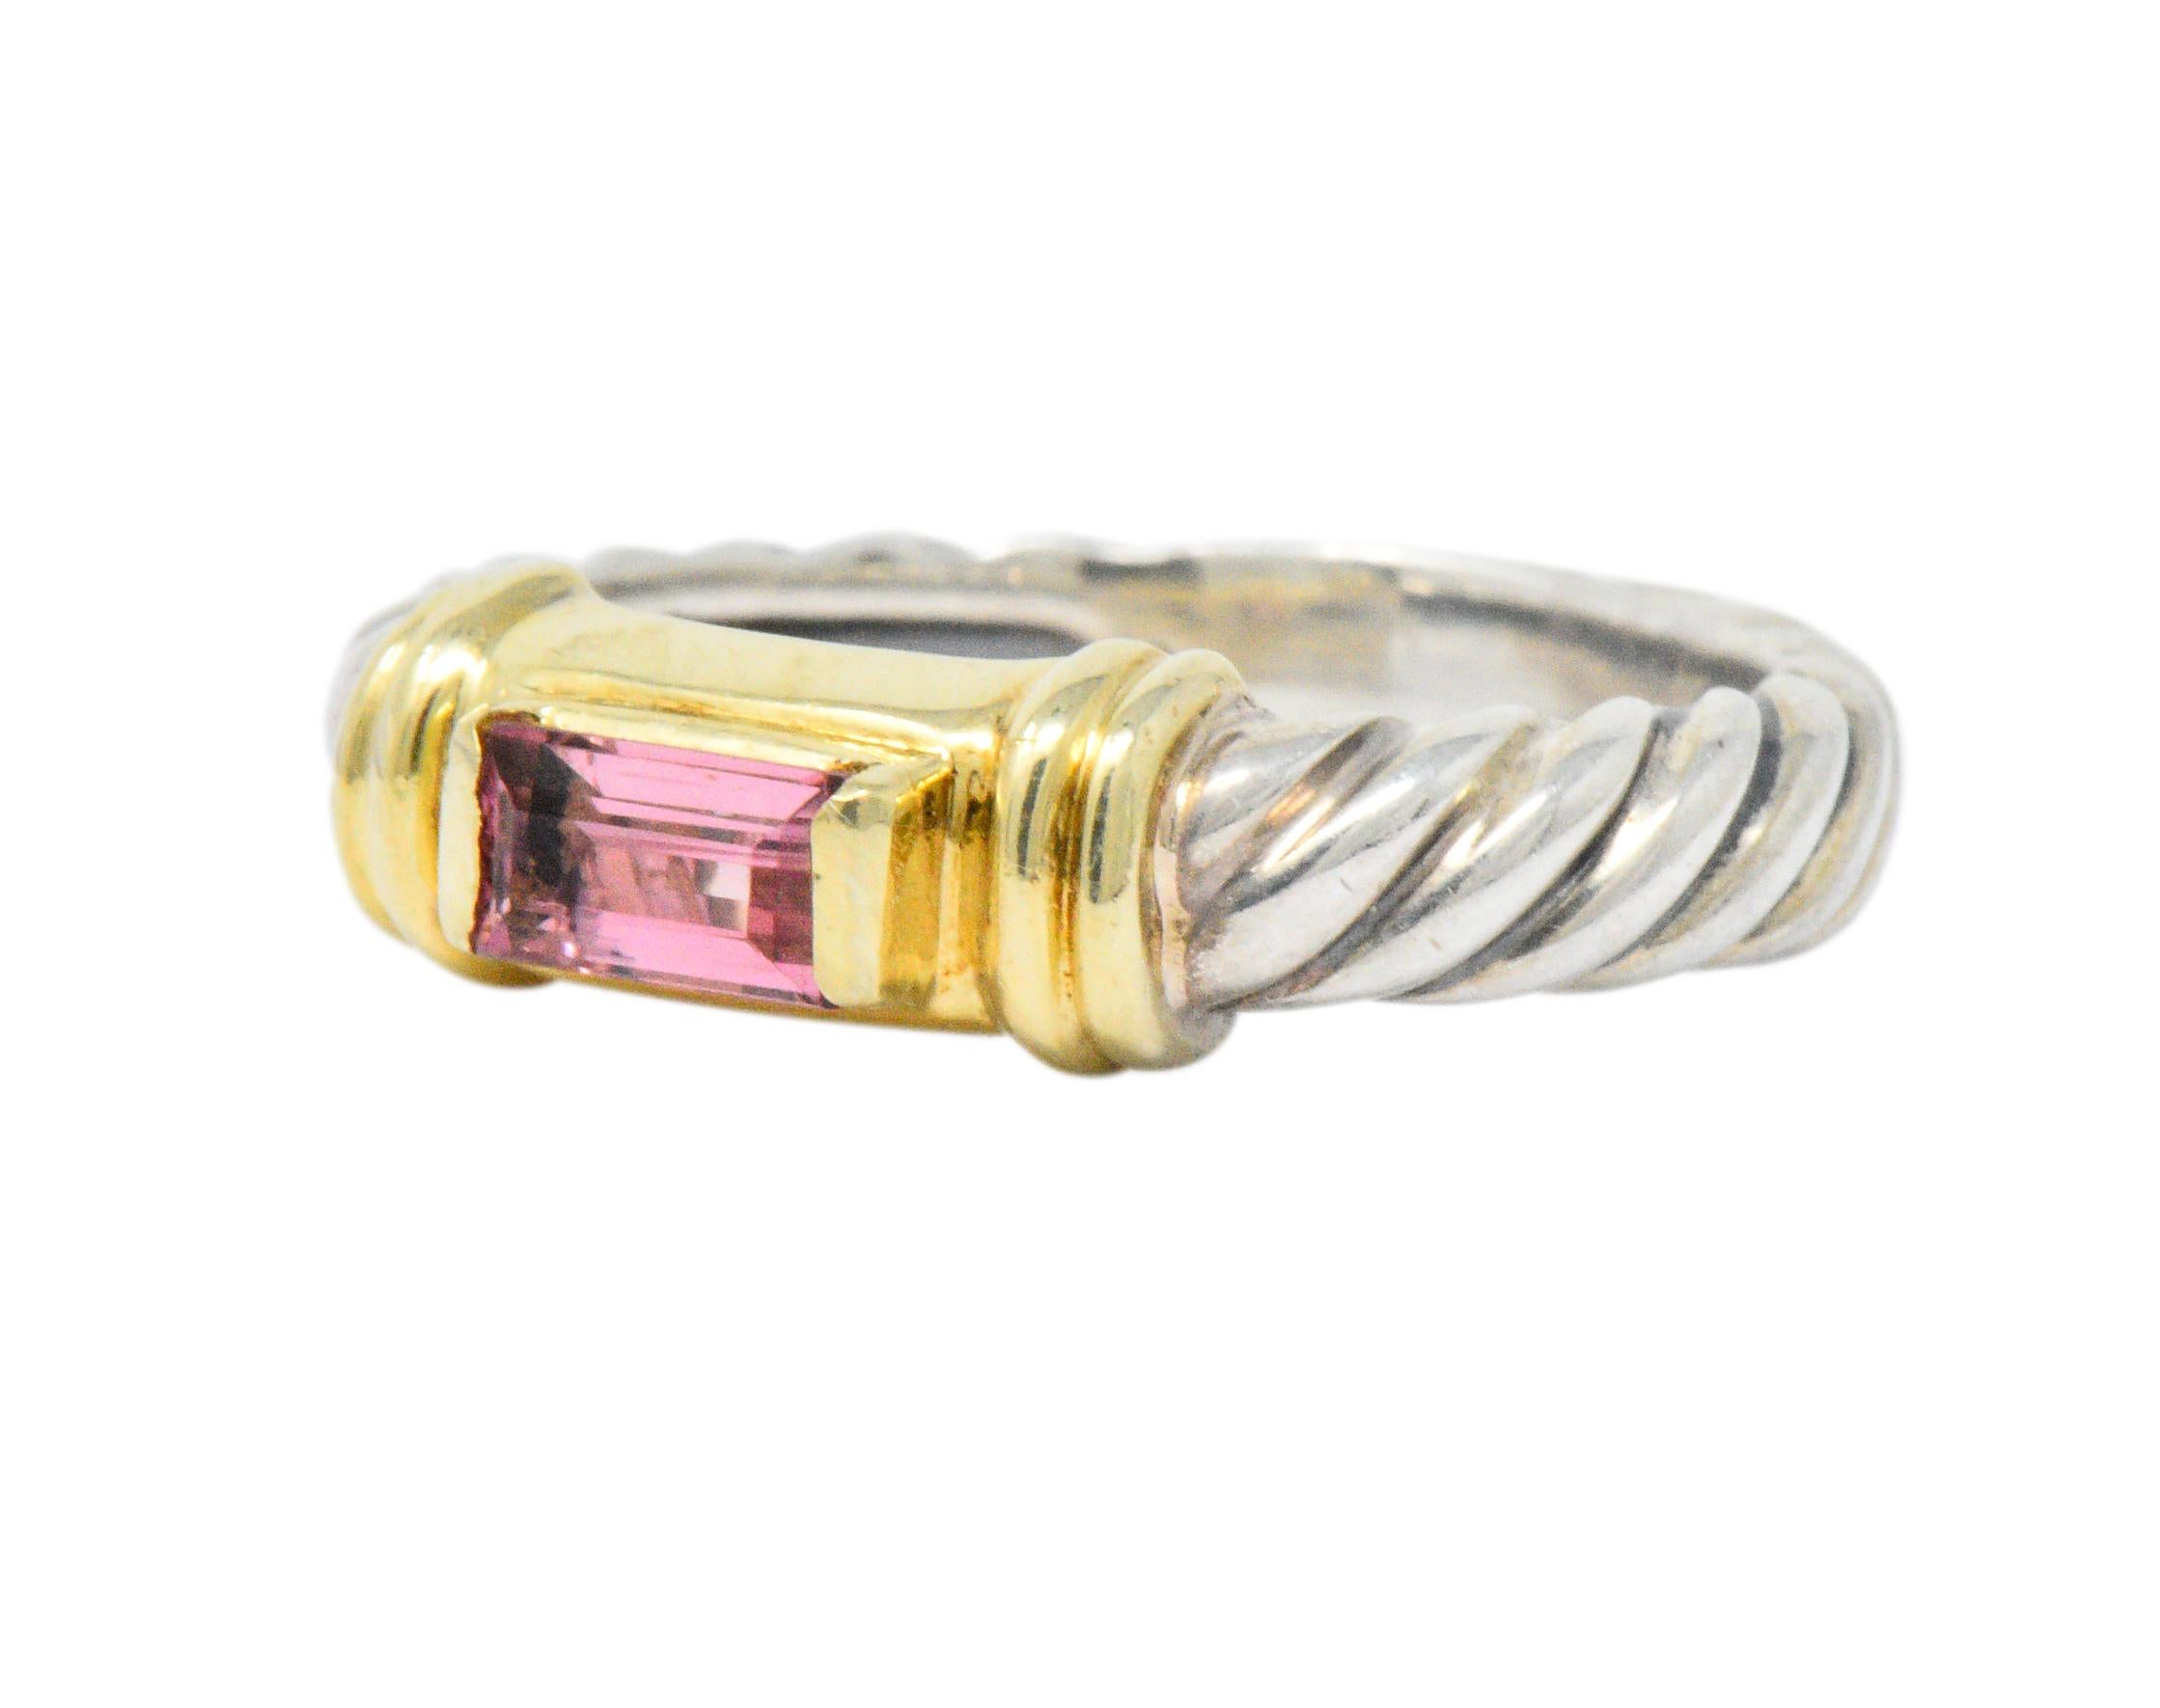 Centering an emerald cut pink tourmaline of deep pale rose

Elongated 14k yellow gold prongs on each end with ribbed accents

Classic David Yurman cable twist band

Signed DY 585 925 and from the Metro collection

Top measures 4.5 mm wide and sits 4